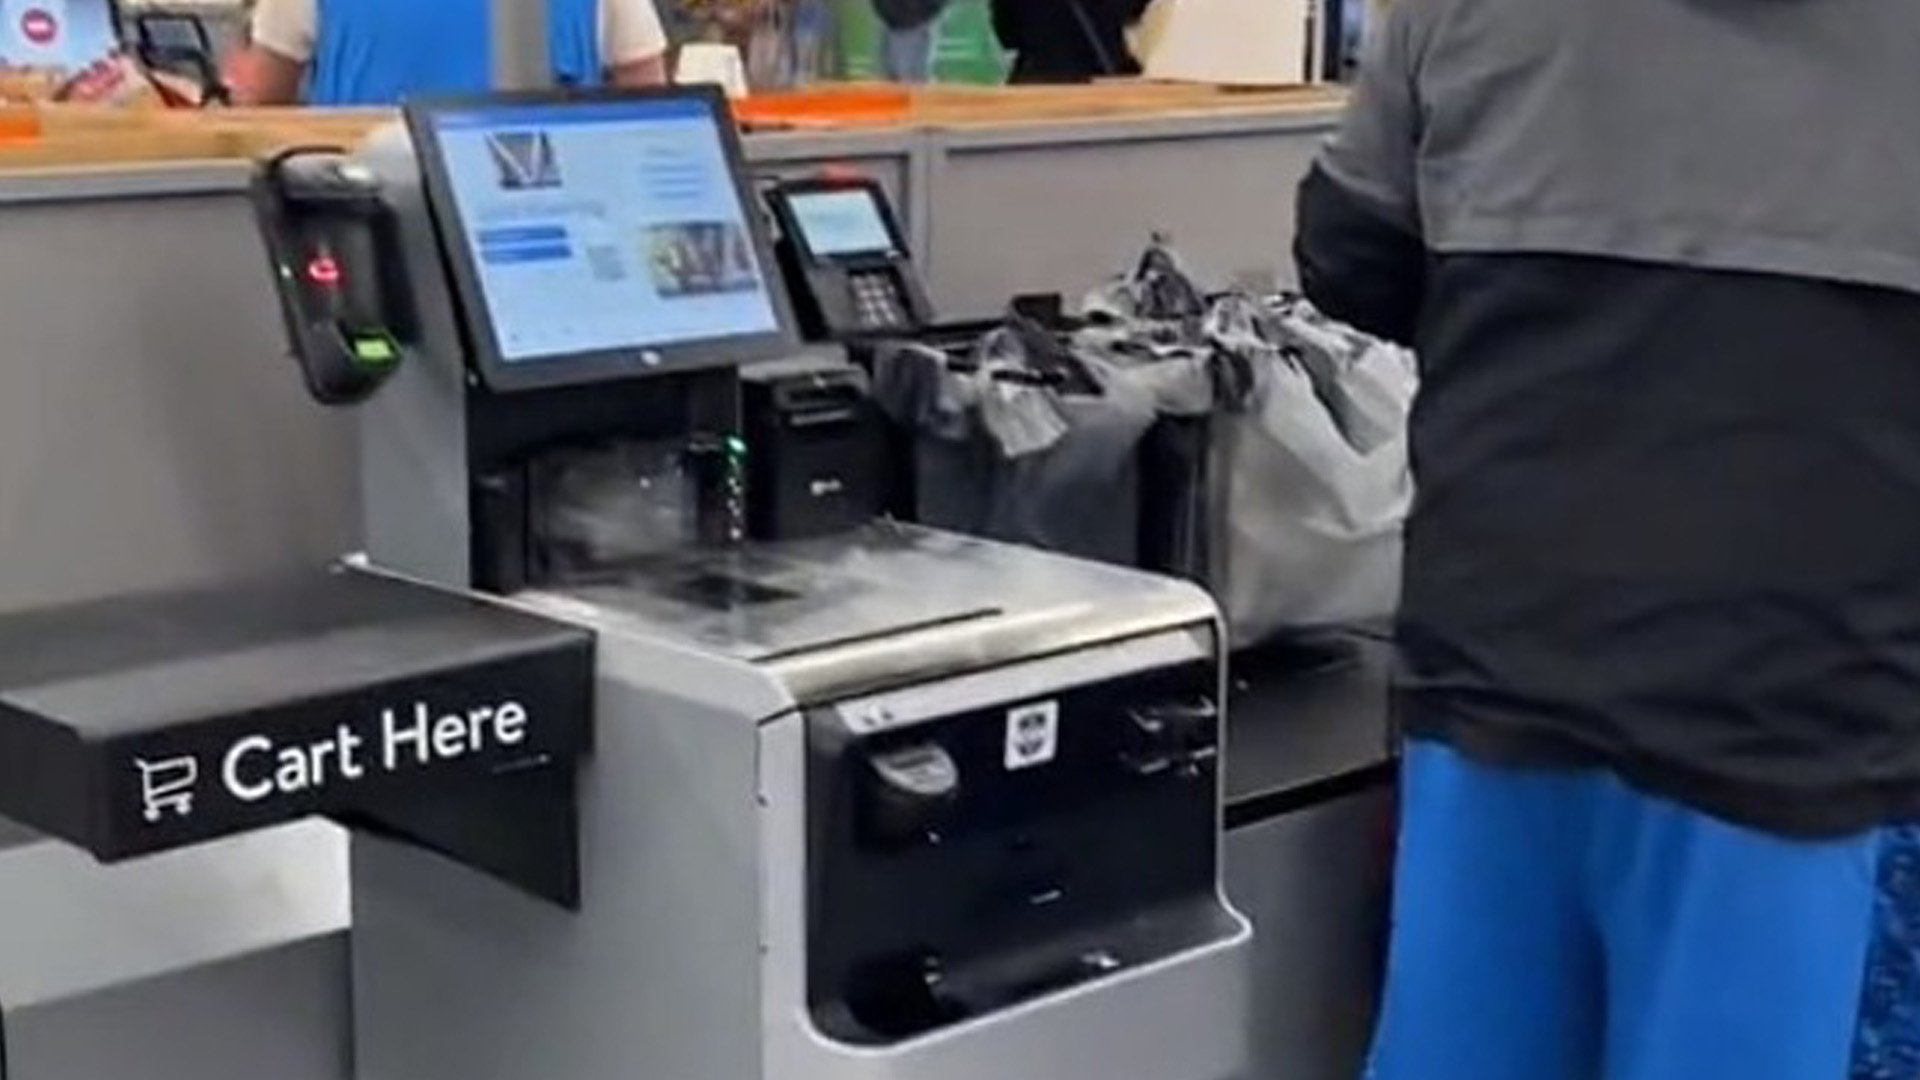 Walmart Ditches Self-Checkout in Response to Rising Shoplifting Concerns